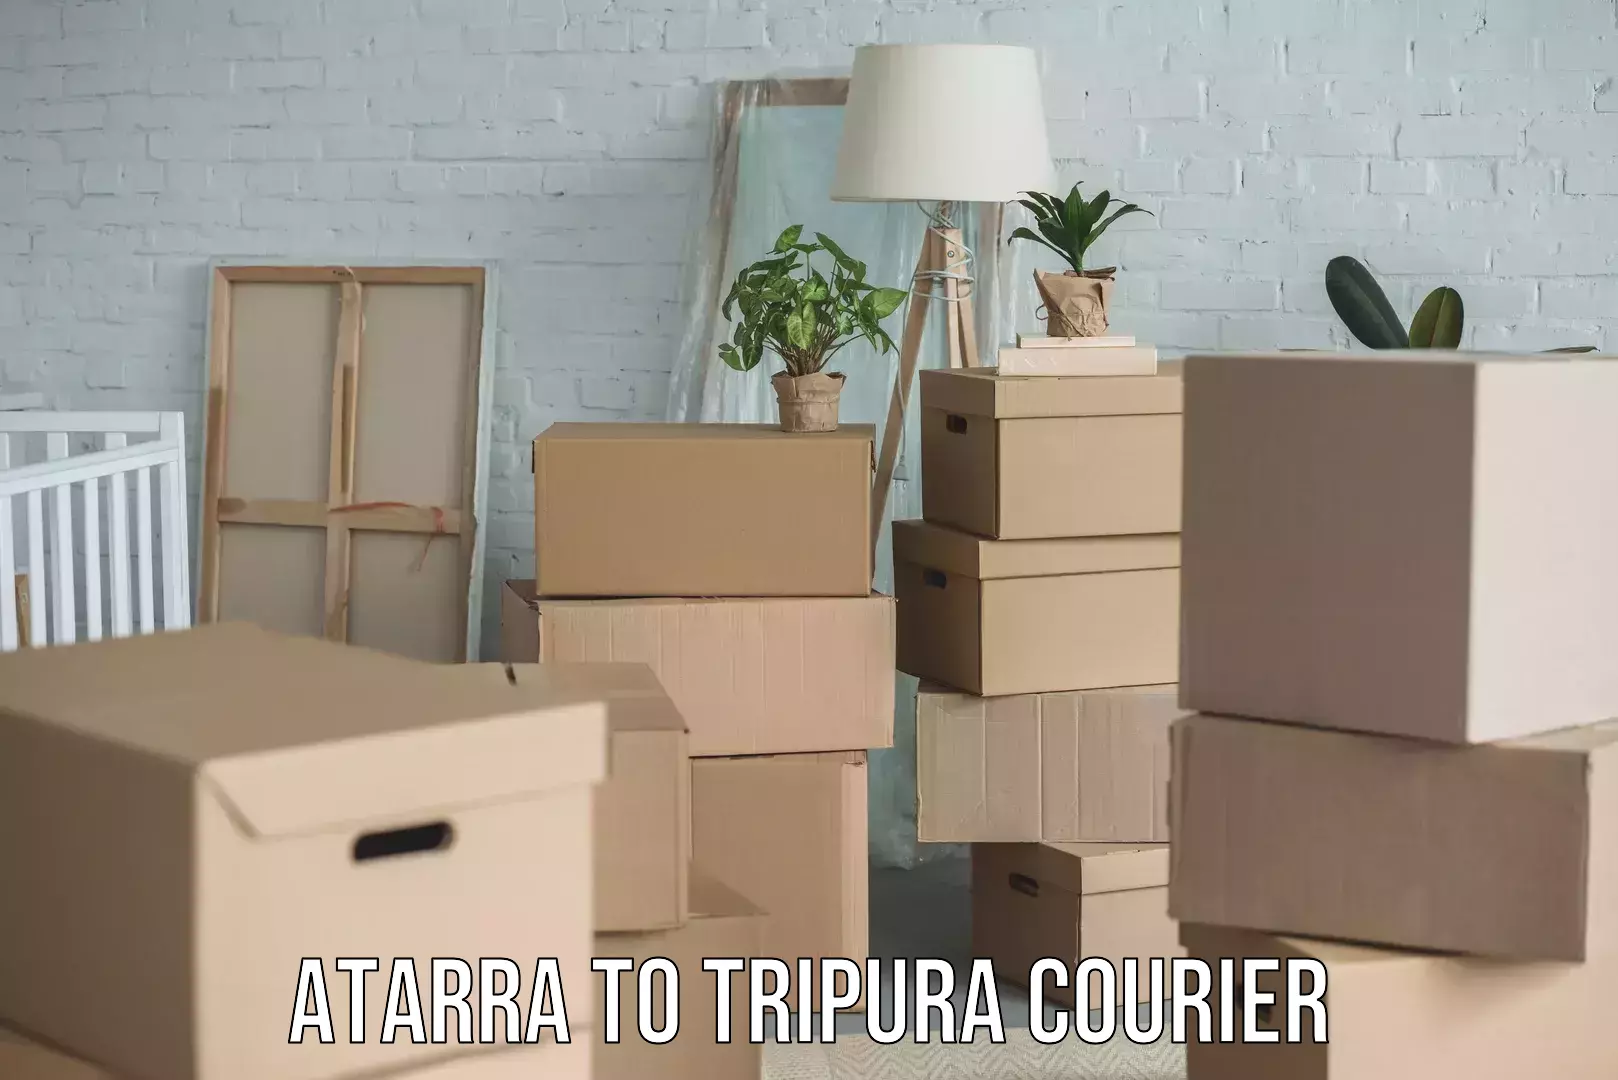 Full-service courier options Atarra to Tripura